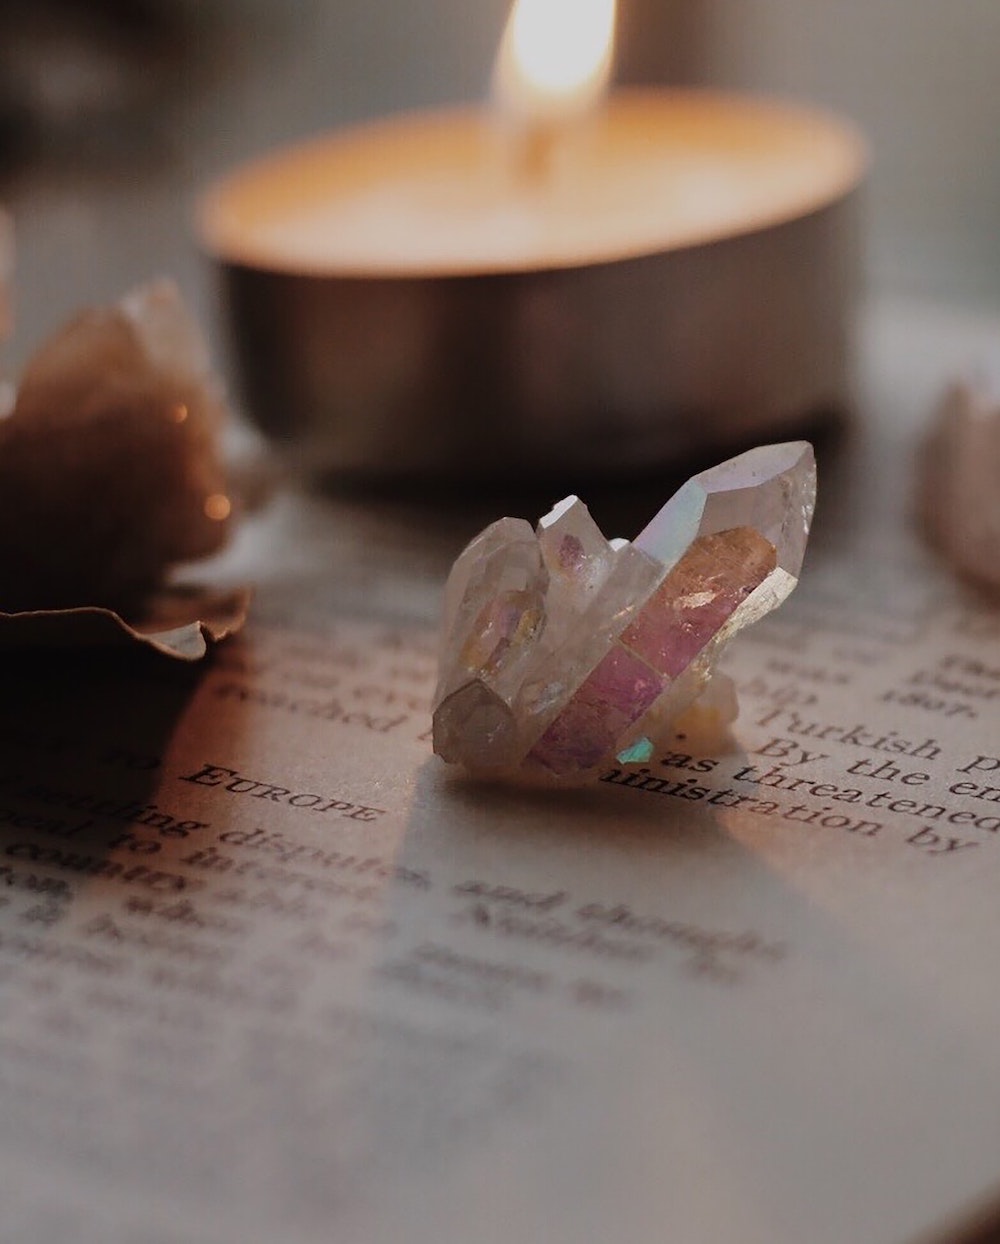 Ready to Start Your Self-Healing Journey? These Crystals Can Help